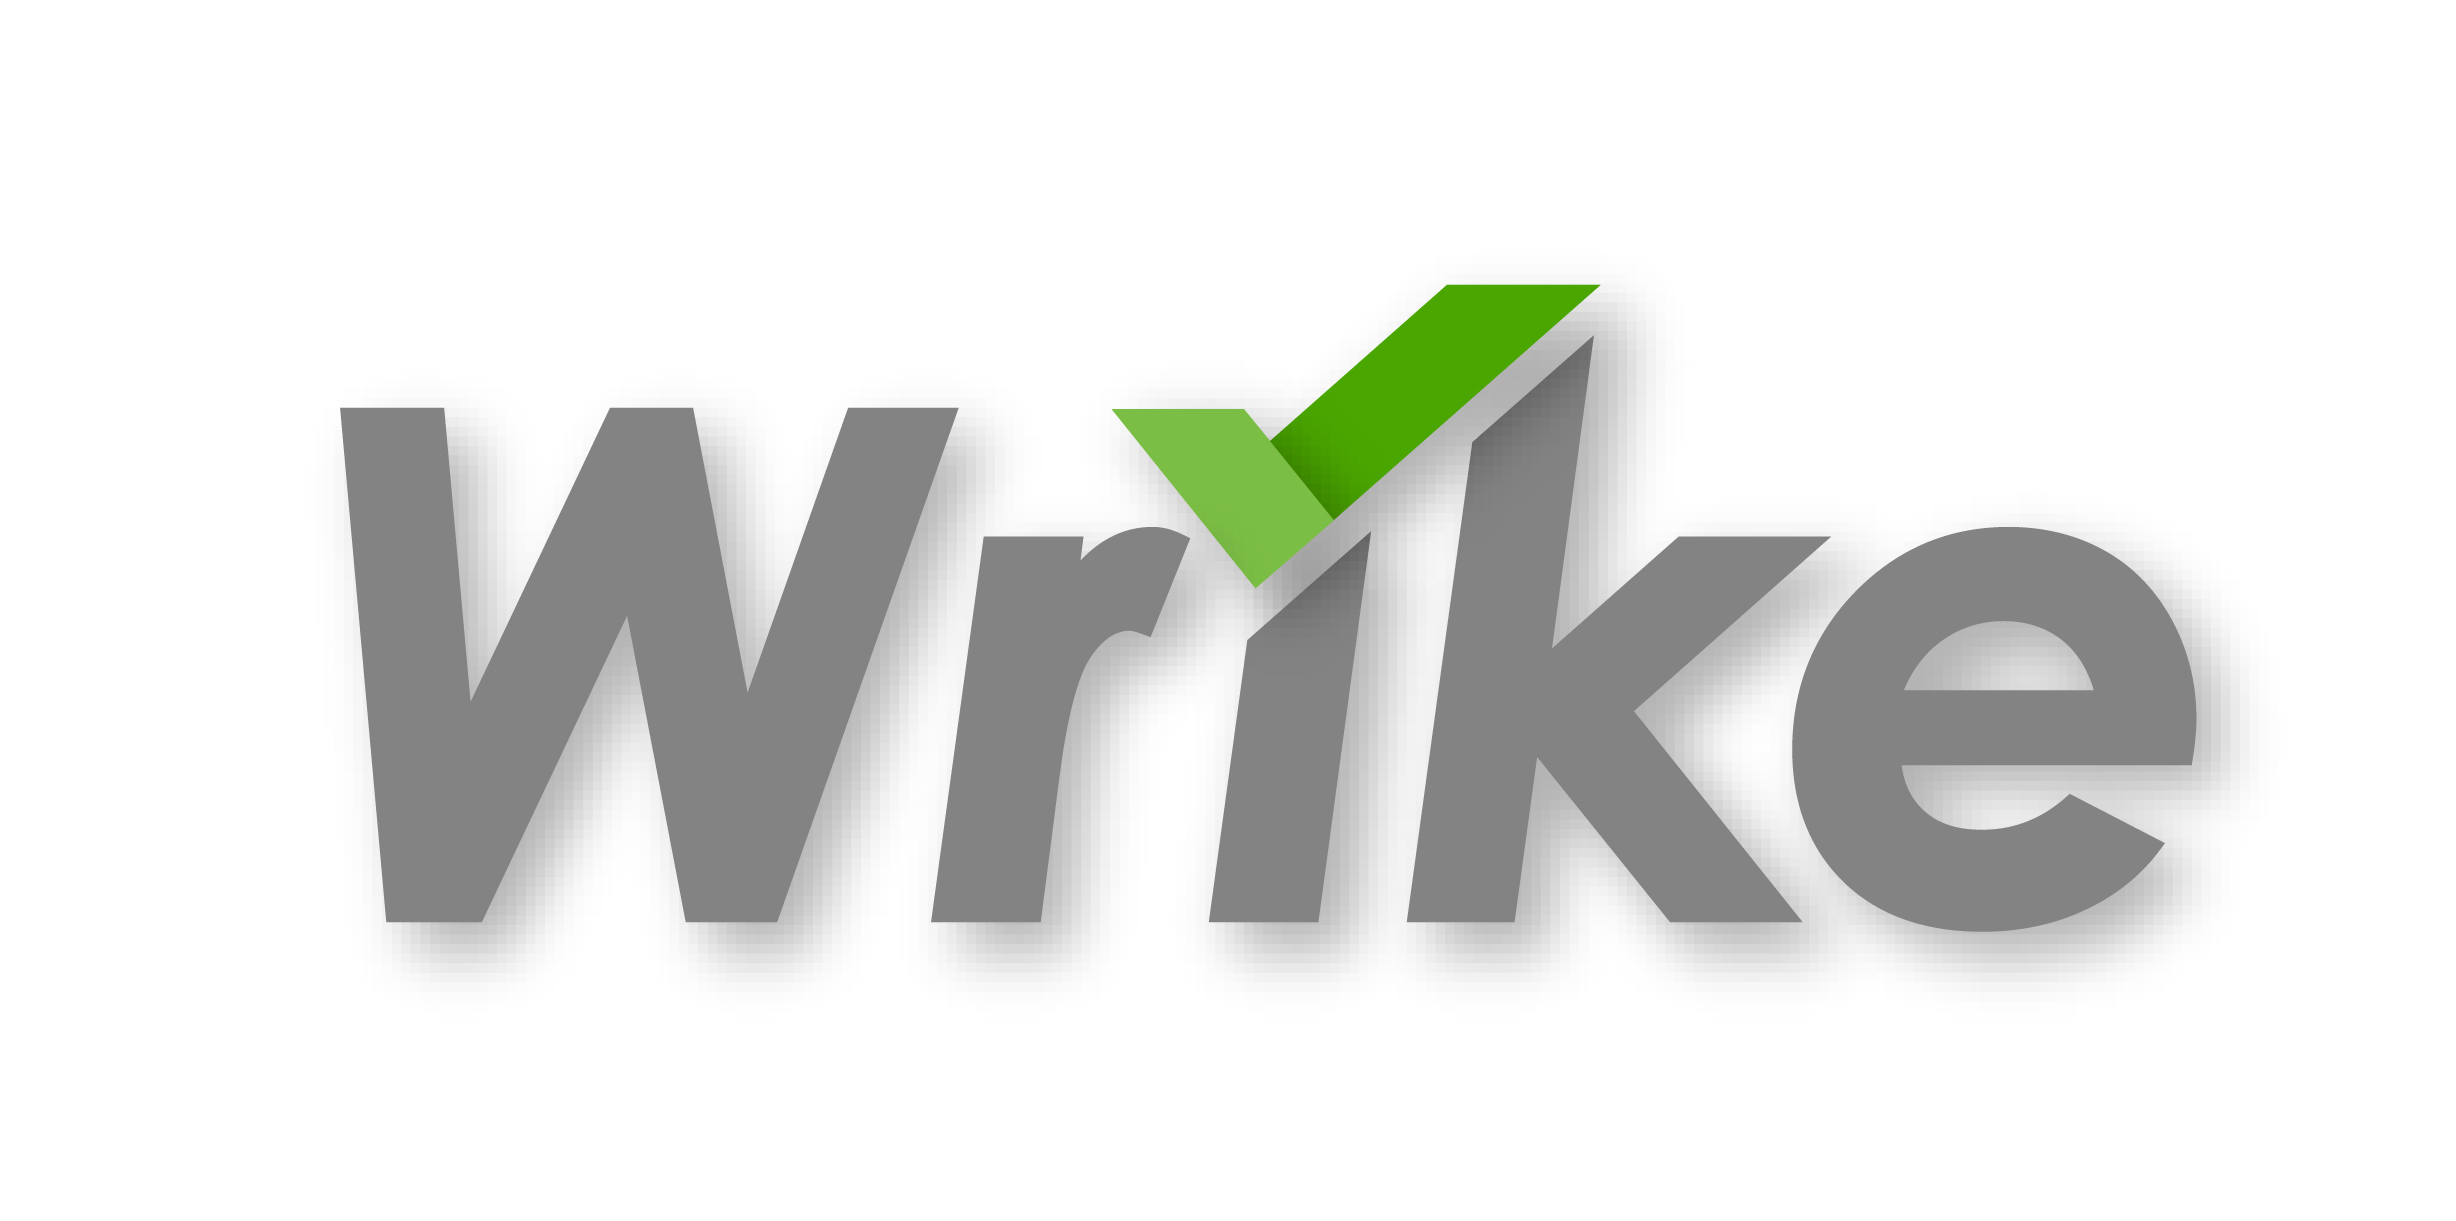 Wrike revolutionizes team collaboration with their intuitive and easy-to-use project management tools